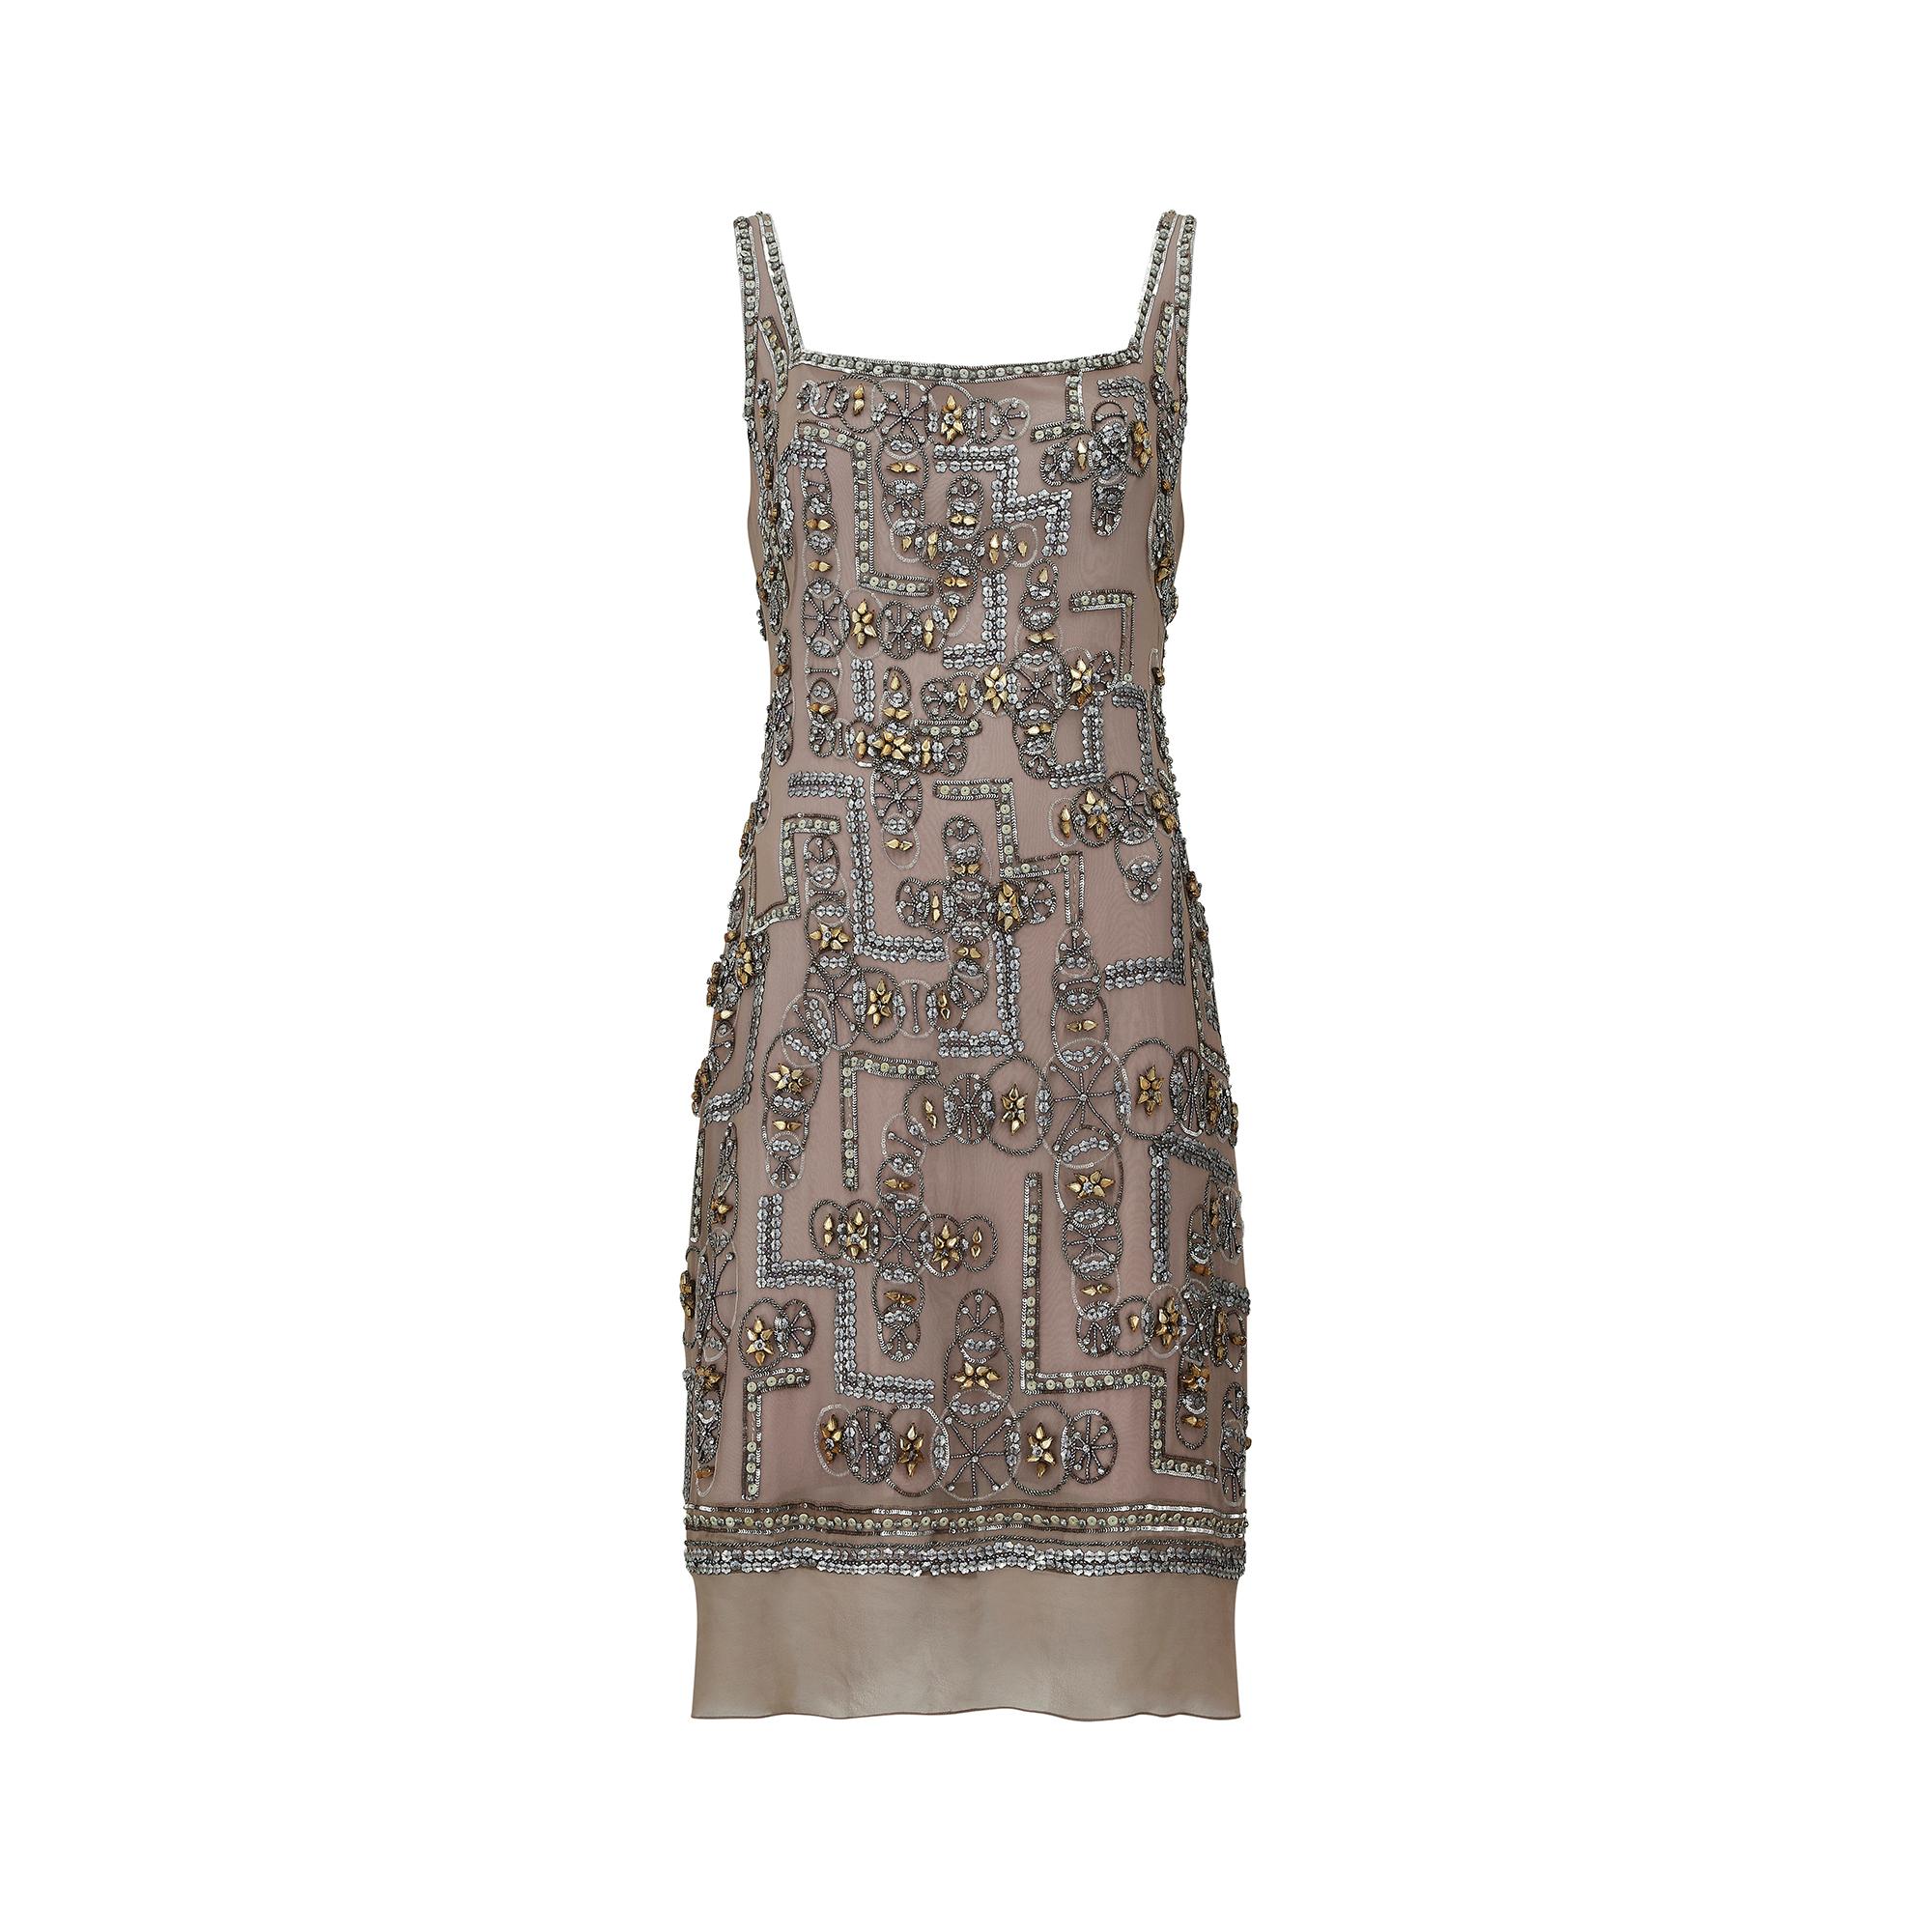 Late 1990s to 2000s Lindka Cierach couture beaded dress which takes some of its inspiration from the Art Deco and flapper style dresses of the early 1920s, with a distinctly modern flair. It has a lovely weight to it, reflective of both its quality